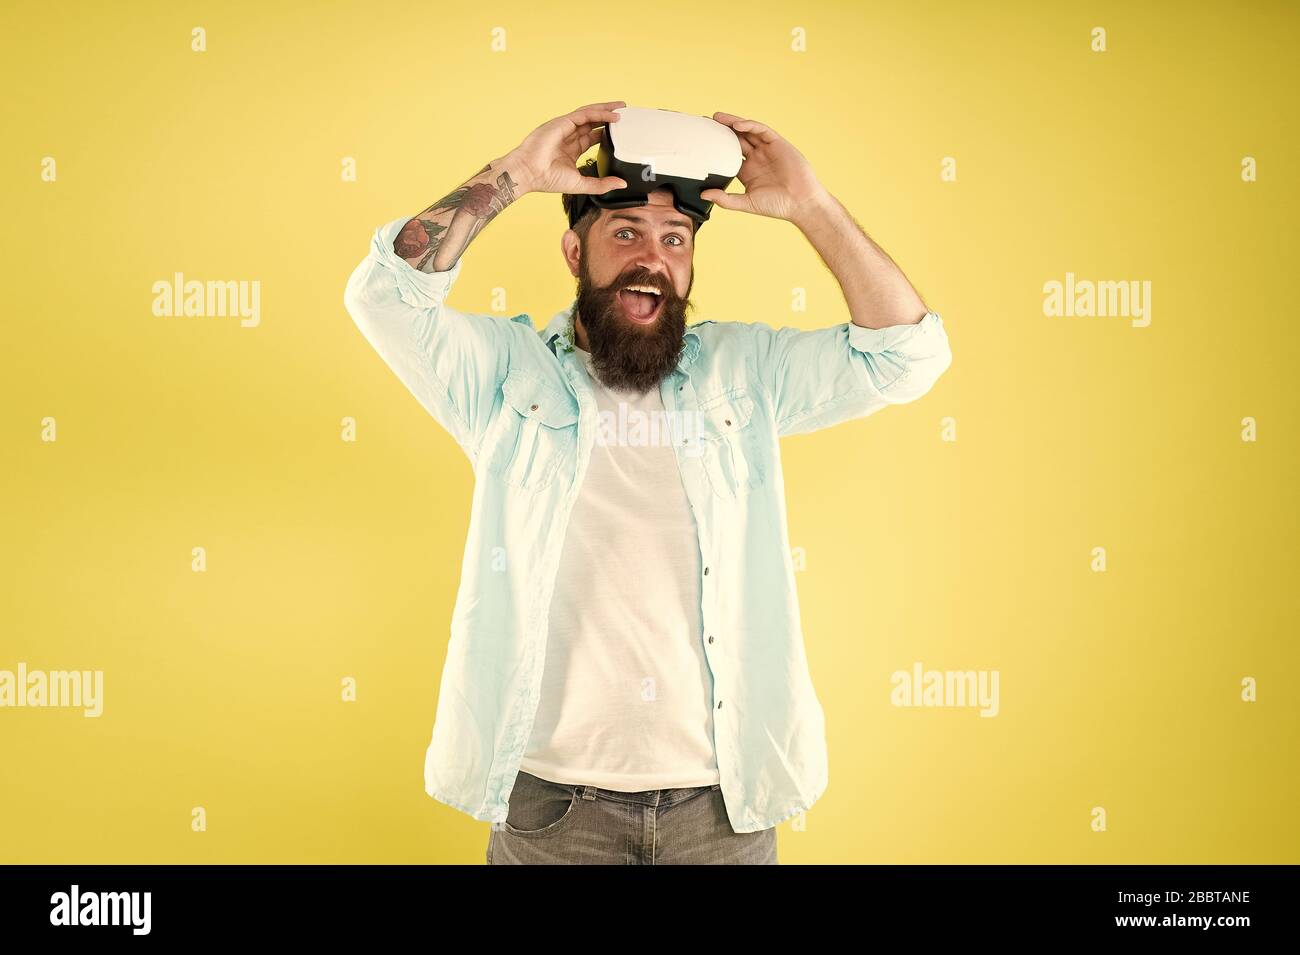 Entertainment. Testing software. Bearded man yellow background vr ...